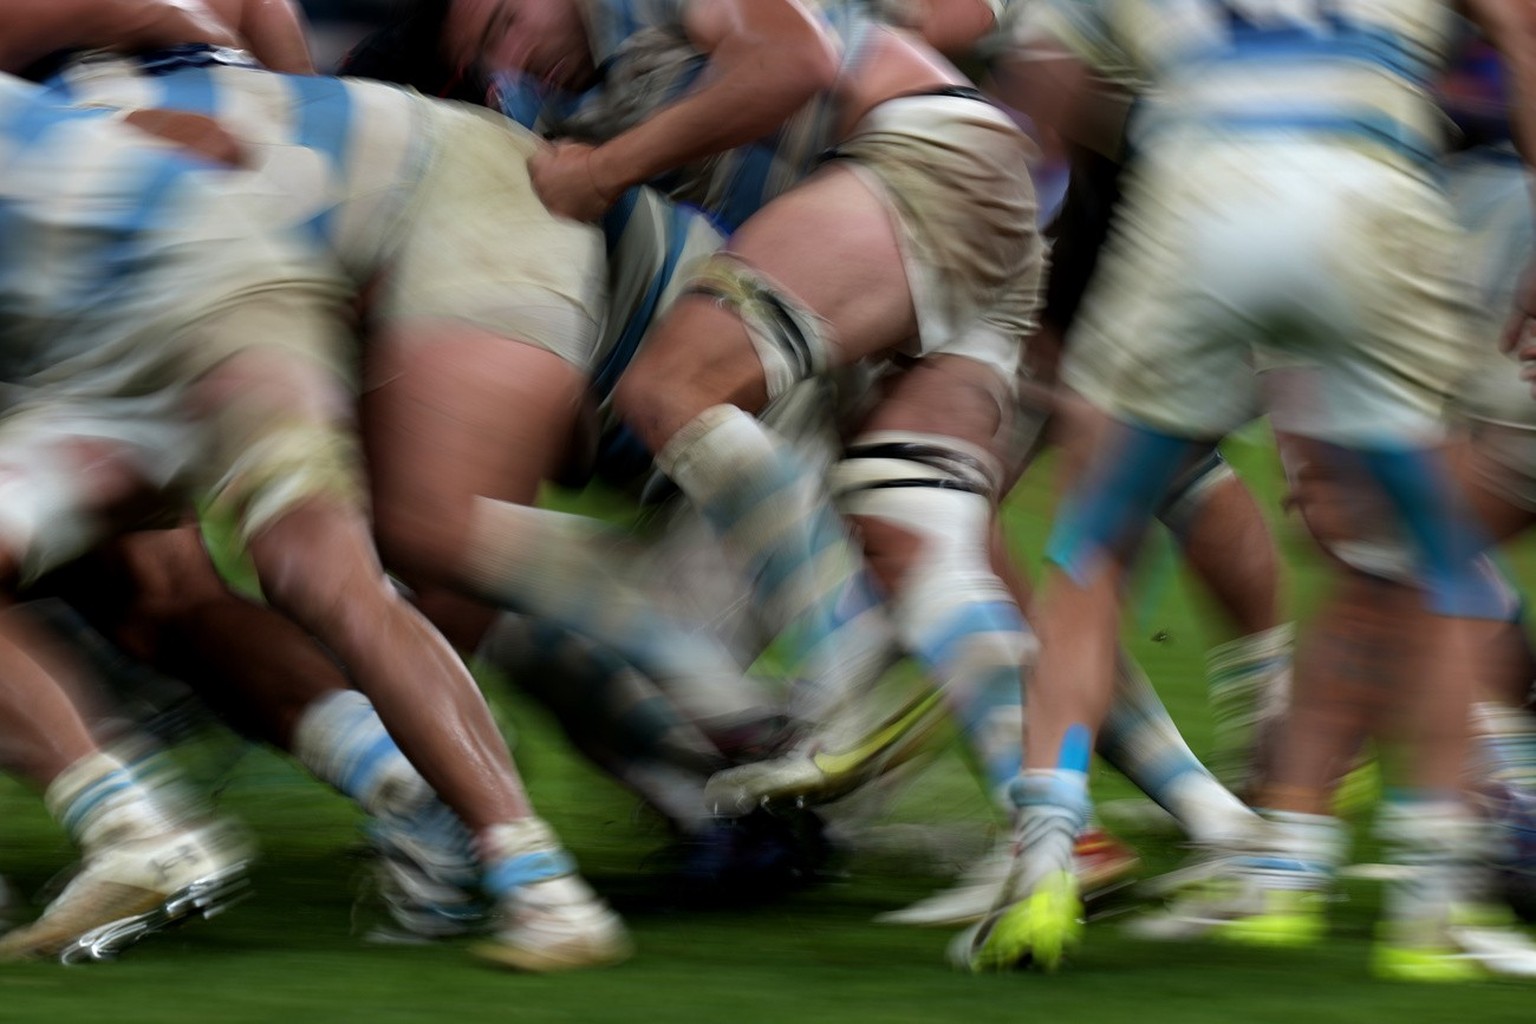 In this picture taken by slow shutter speed, players of Argentina scrum during the Rugby World Cup semifinal match between Argentina and New Zealand at the Stade de France in Saint-Denis, outside Pari ...